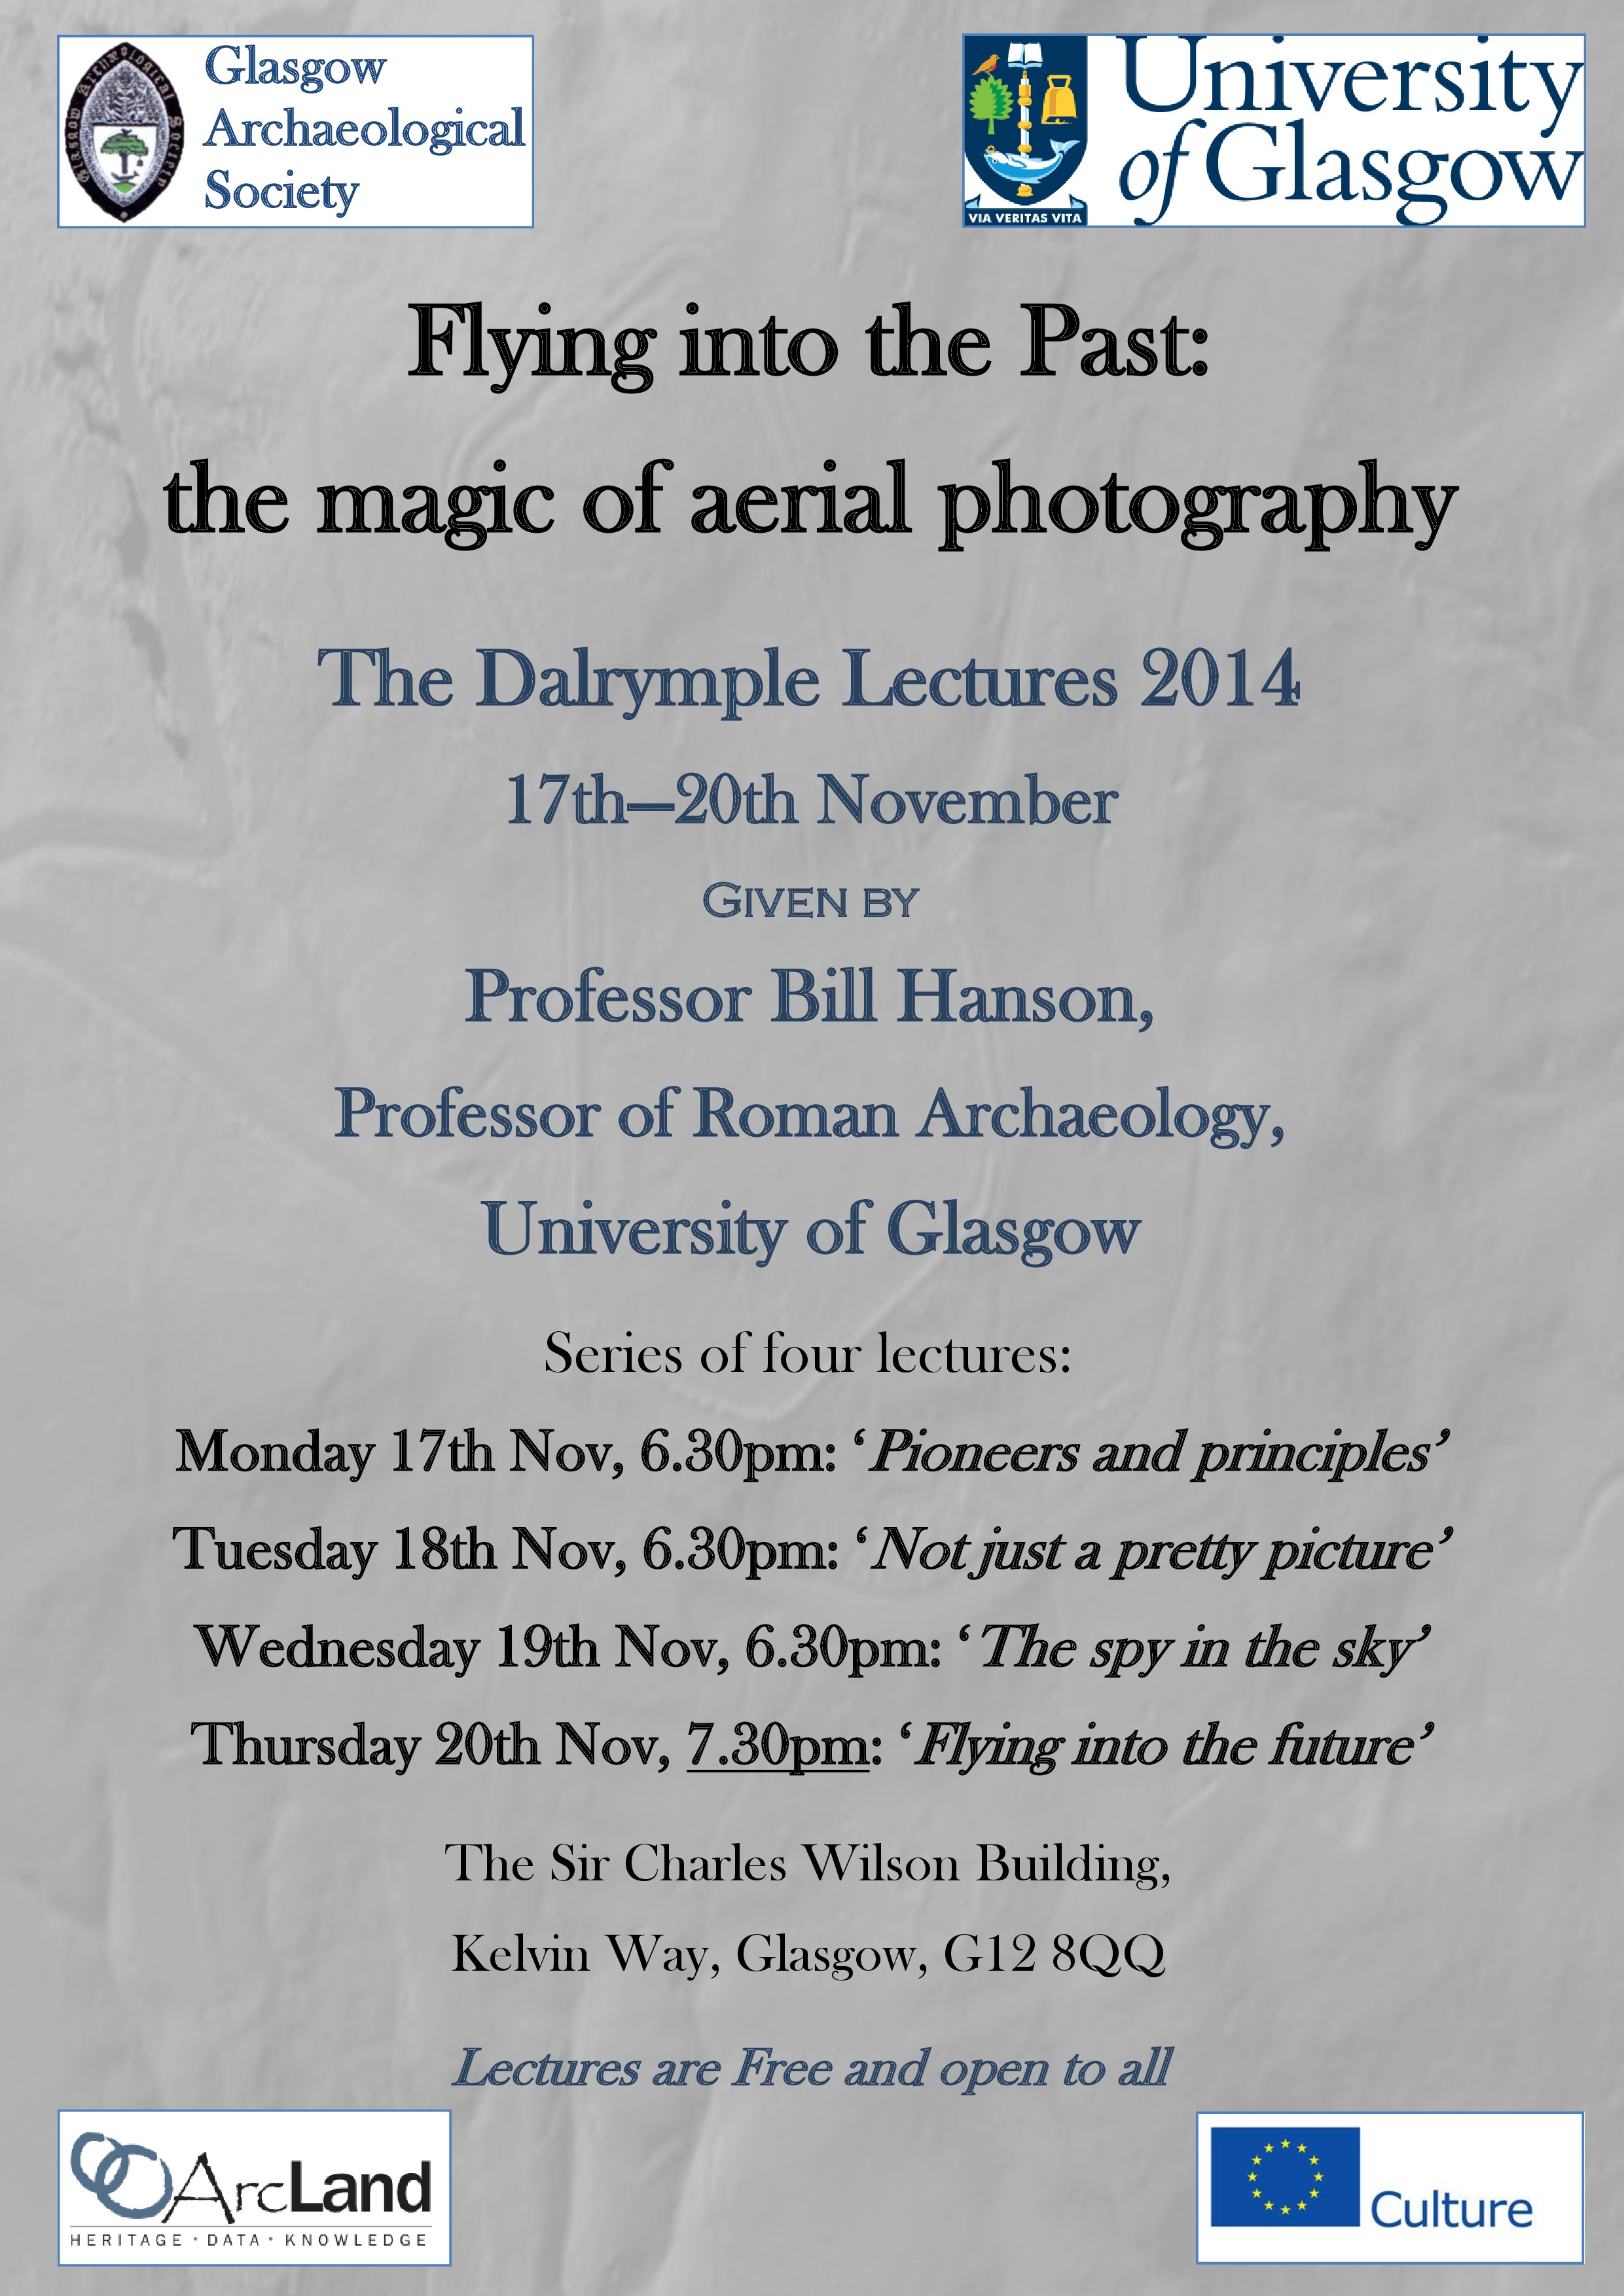 Dalrymple Lectures 2014 (jpg)